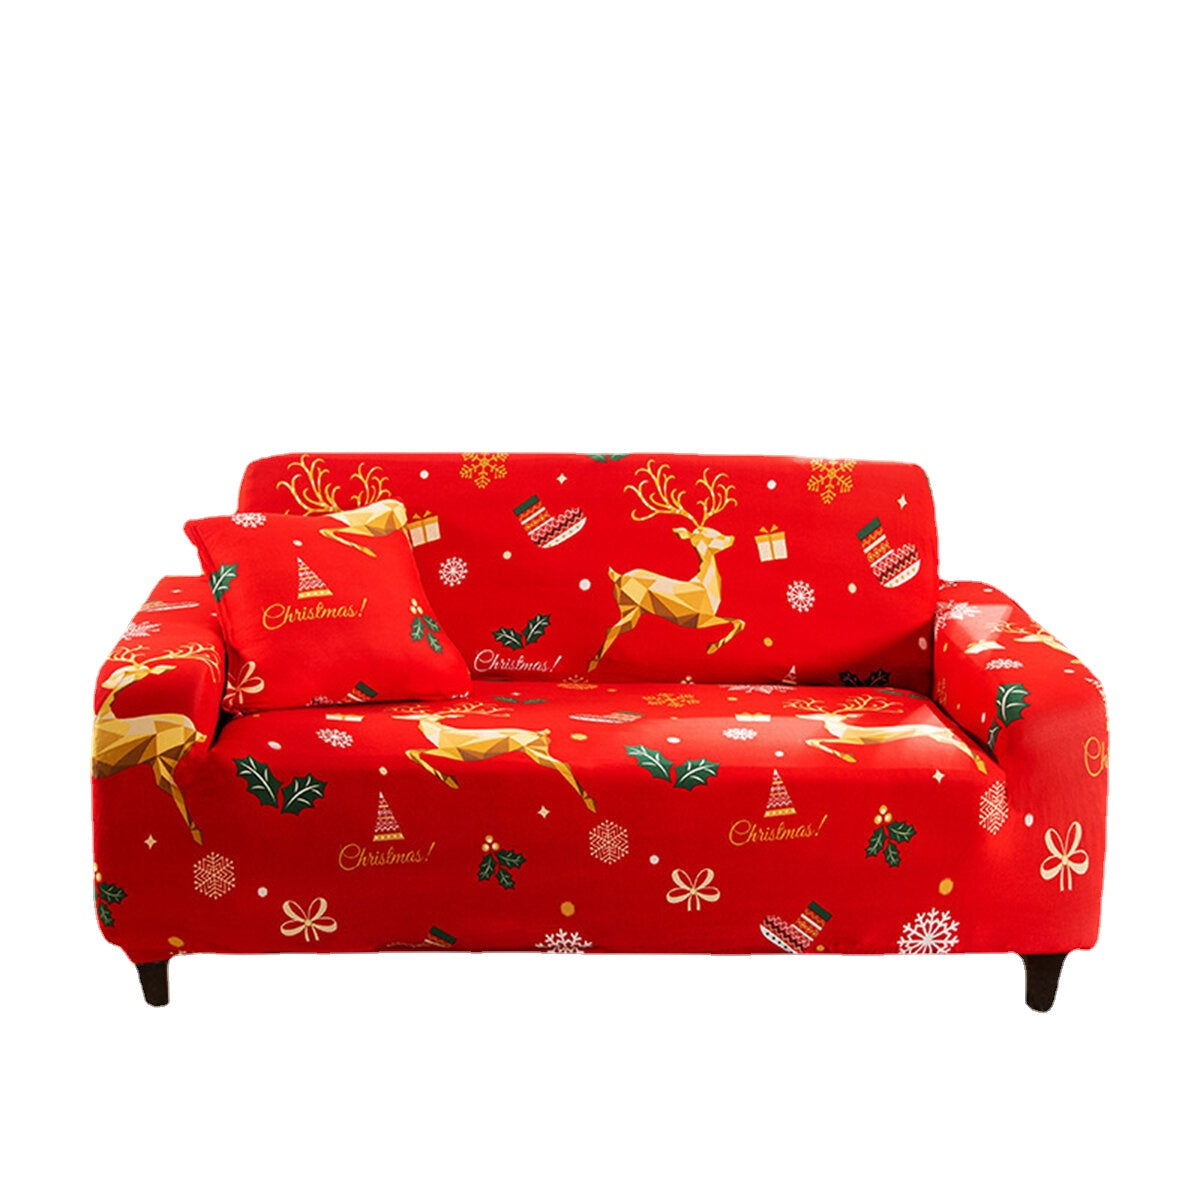 1/2/3/4 Seater Christmas Sofa Cover Elastic Chair Seat Protector Stretch Slipcover Home Office Furniture Accessories Decorations